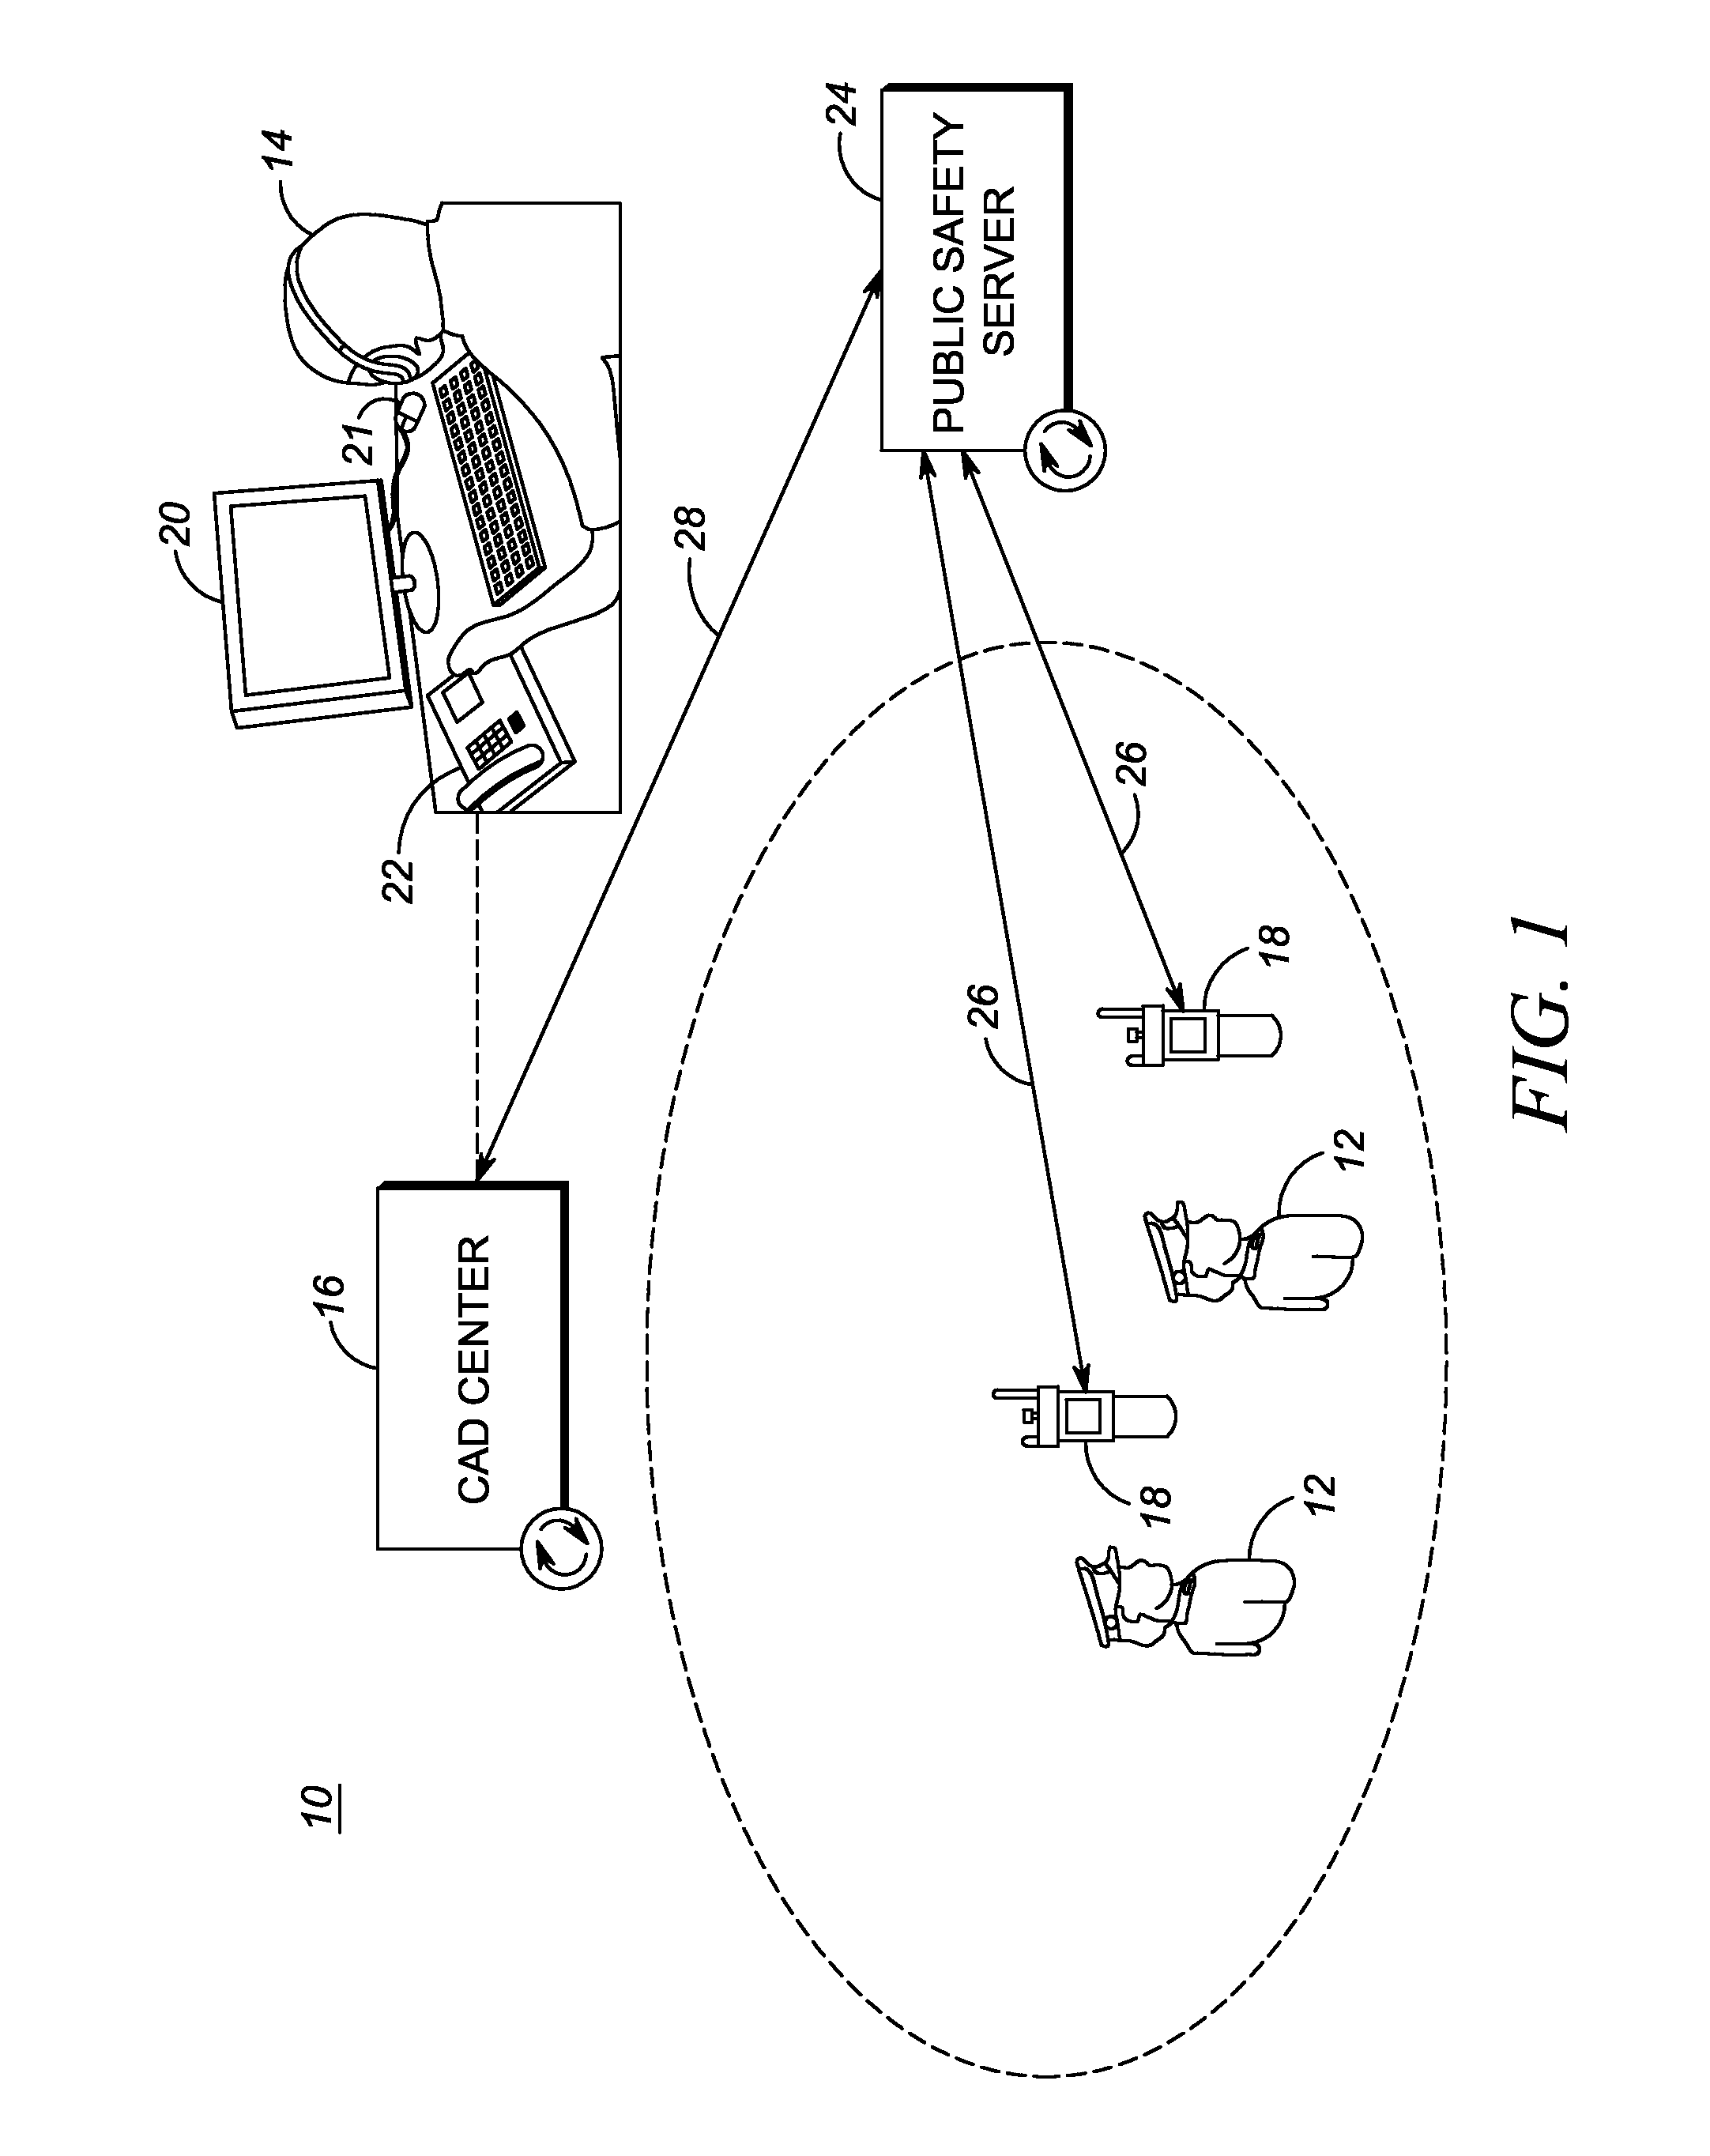 Method of and system for assisting a computer aided dispatch center operator with dispatching and/or locating public safety personnel